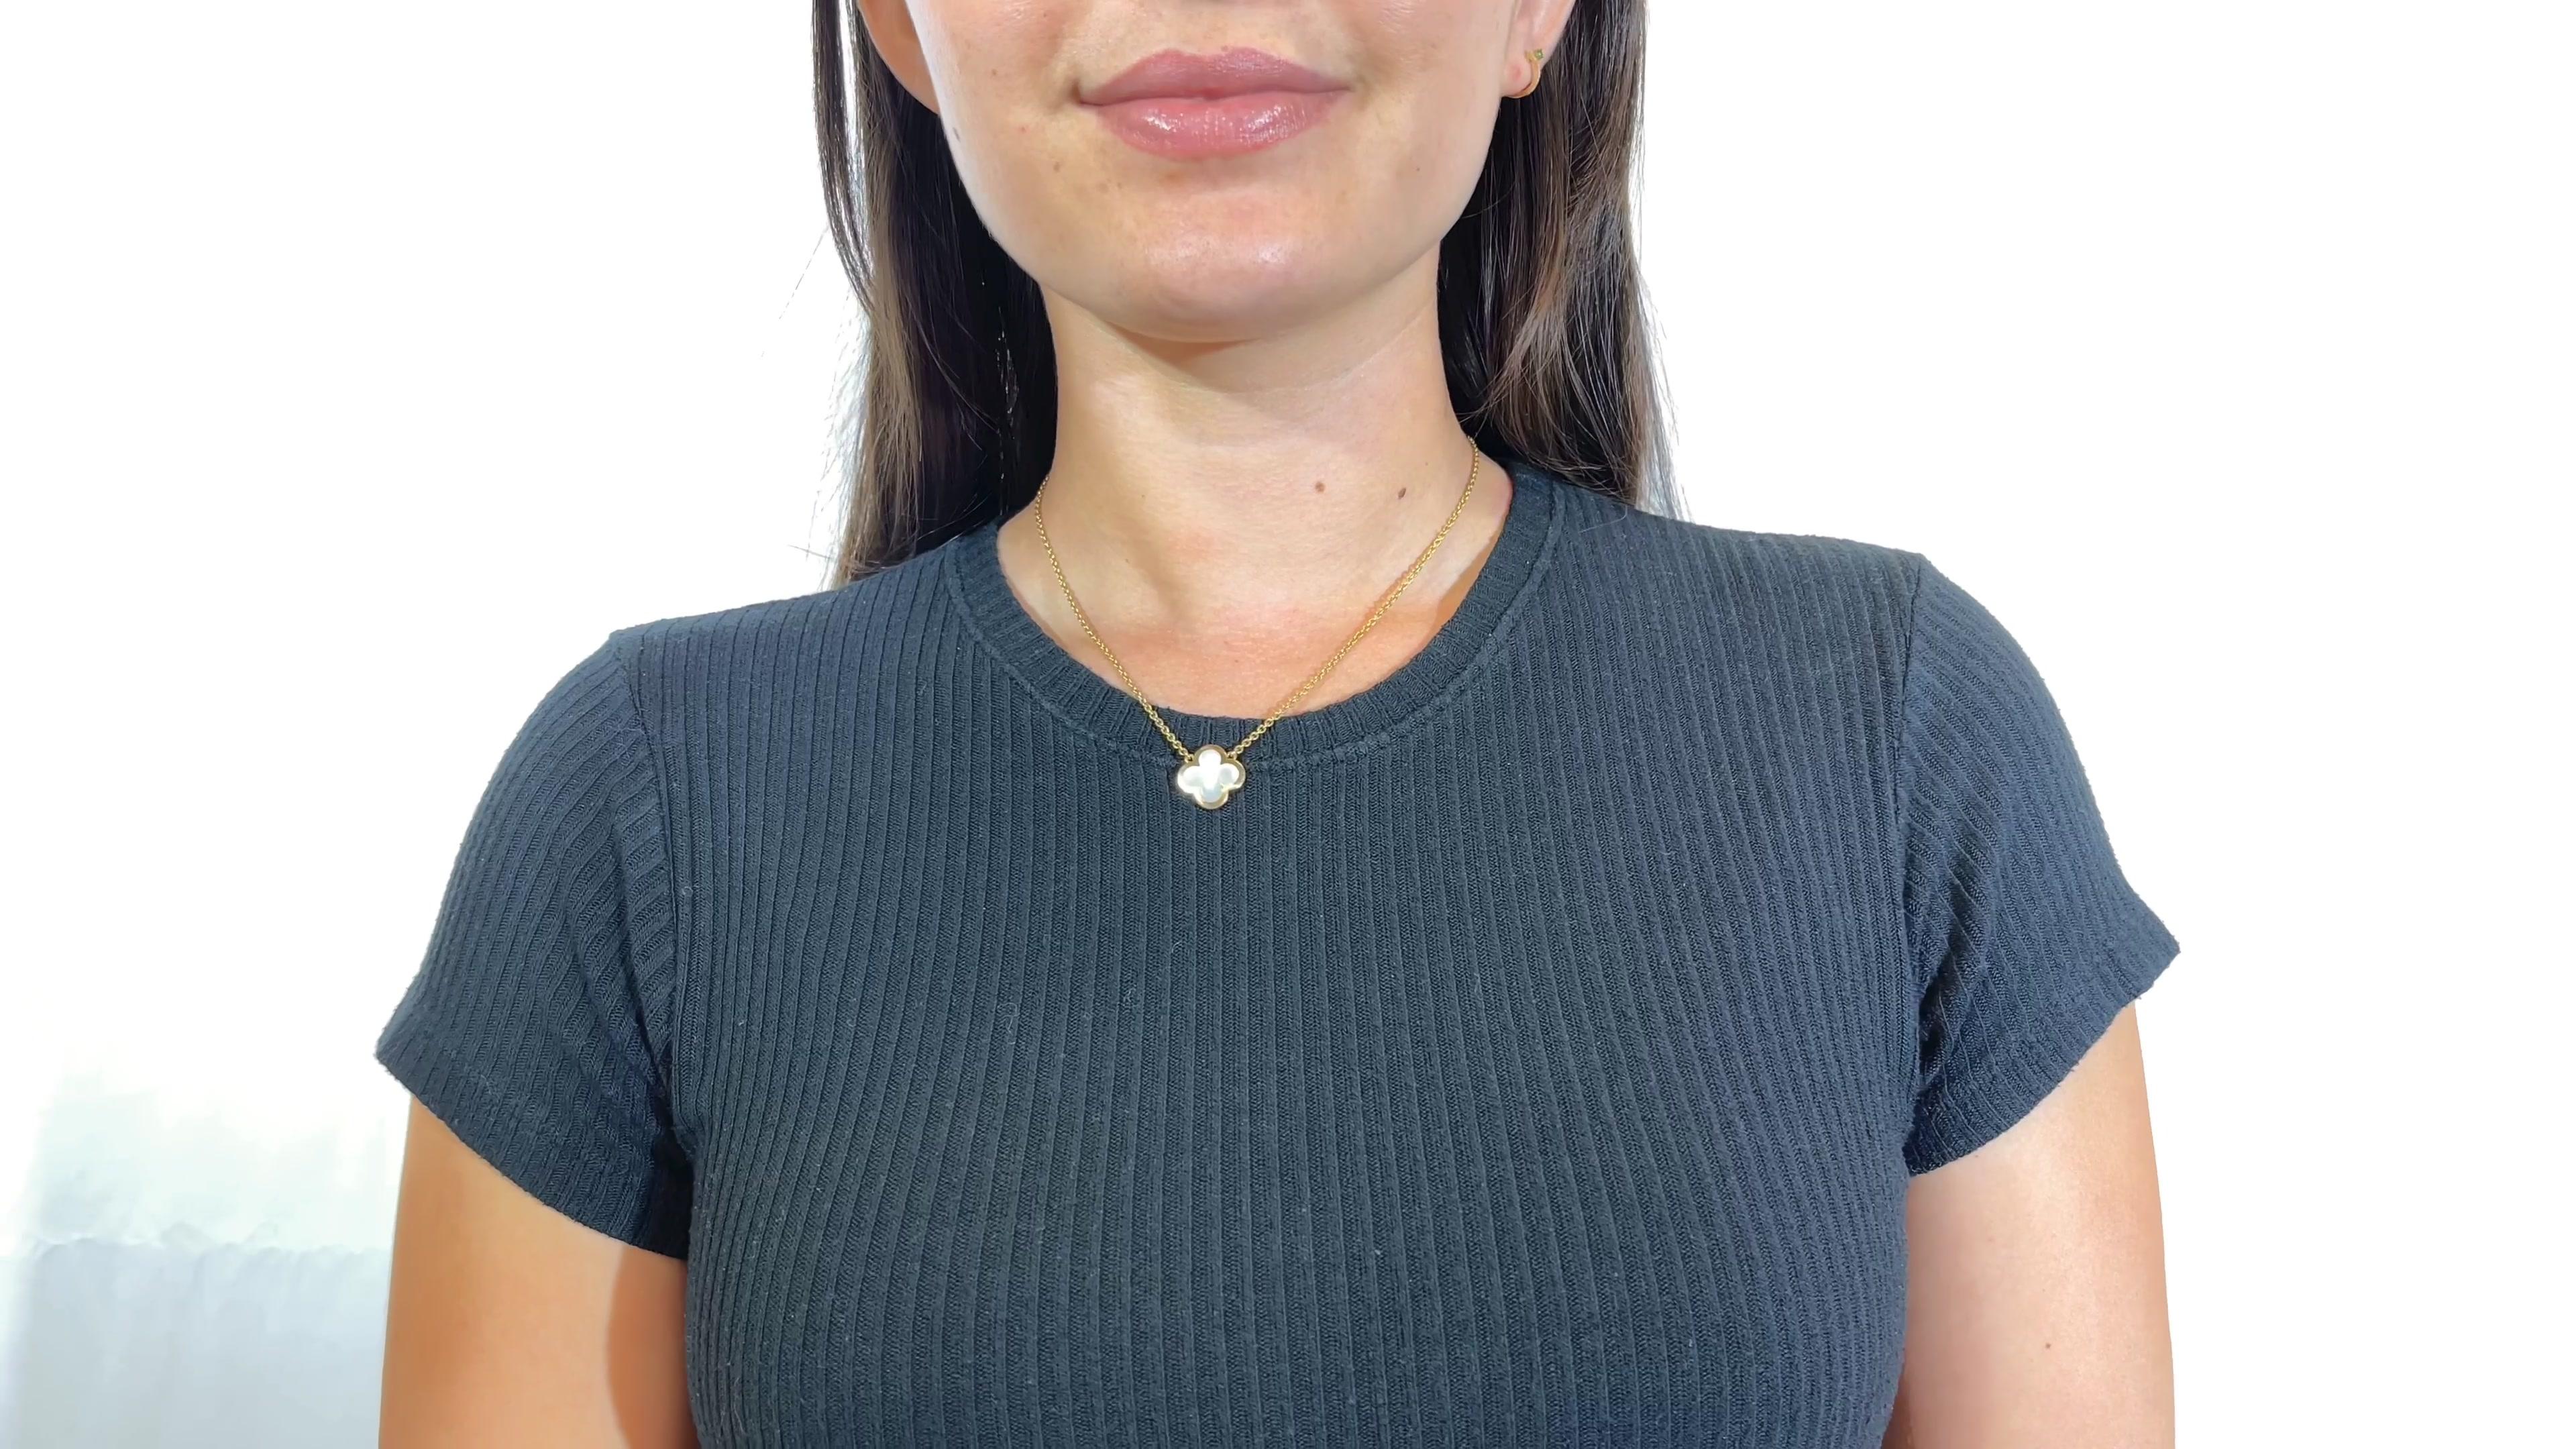 Van Cleef & Arpels Pure Alhambra Mother Of Pearl 18 Karat Gold Necklace. Signed VCA, #CL30242. Circa 1990s. Length is 14-16 inches.

About The Piece: There is just something special about the VCA Alhambra. This collection stole the hearts of